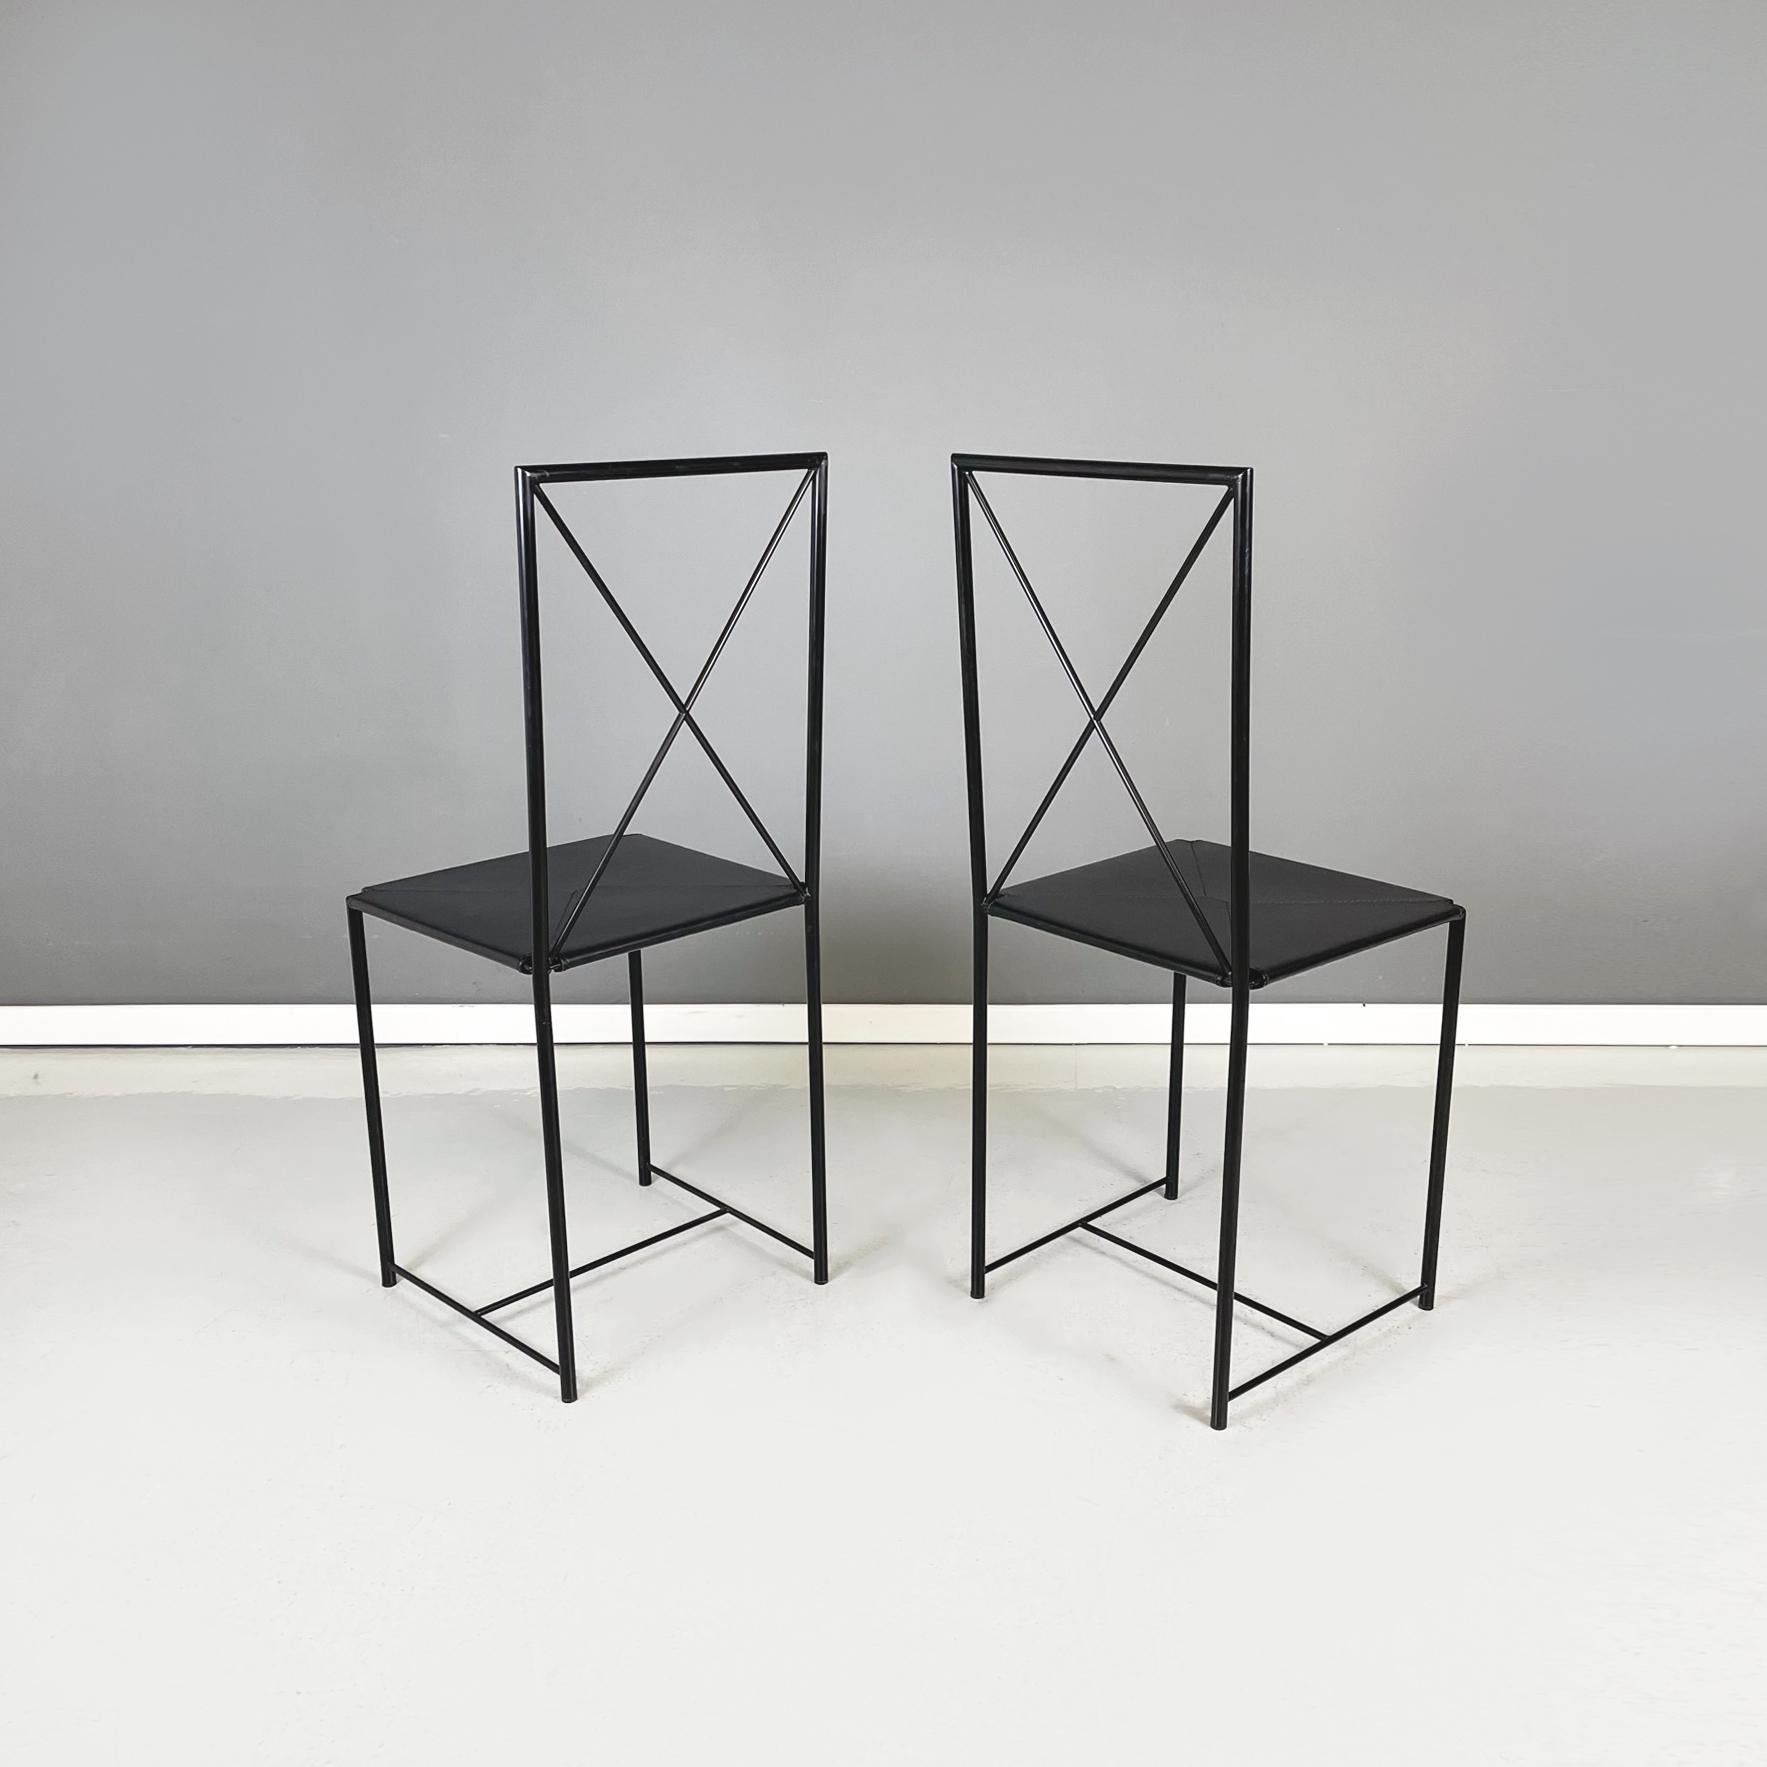 Italian Modern Black Metal Leather Chairs Moka by Asnago Vender Flexoform, 1939 In Good Condition For Sale In MIlano, IT